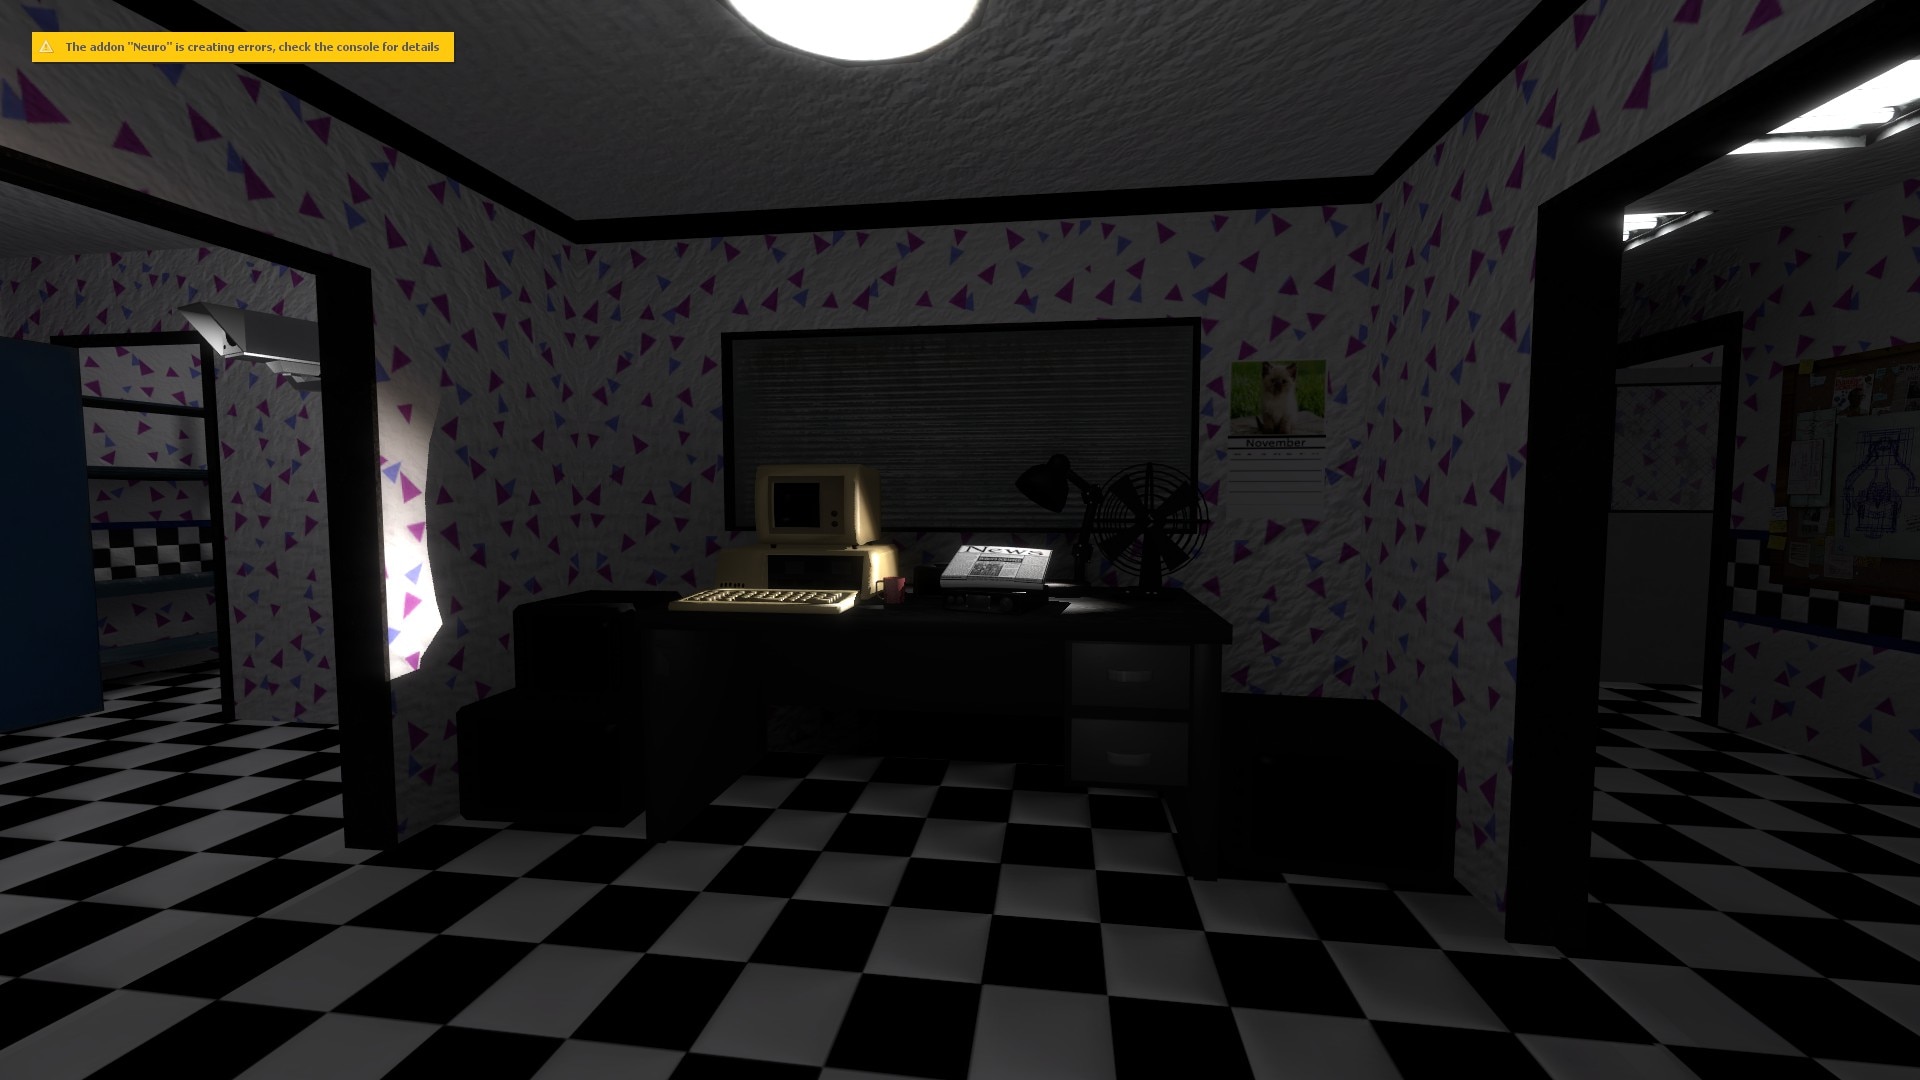 Steam Workshop::Five Nights at Candy's Map Made by Keithy and Alec Denston